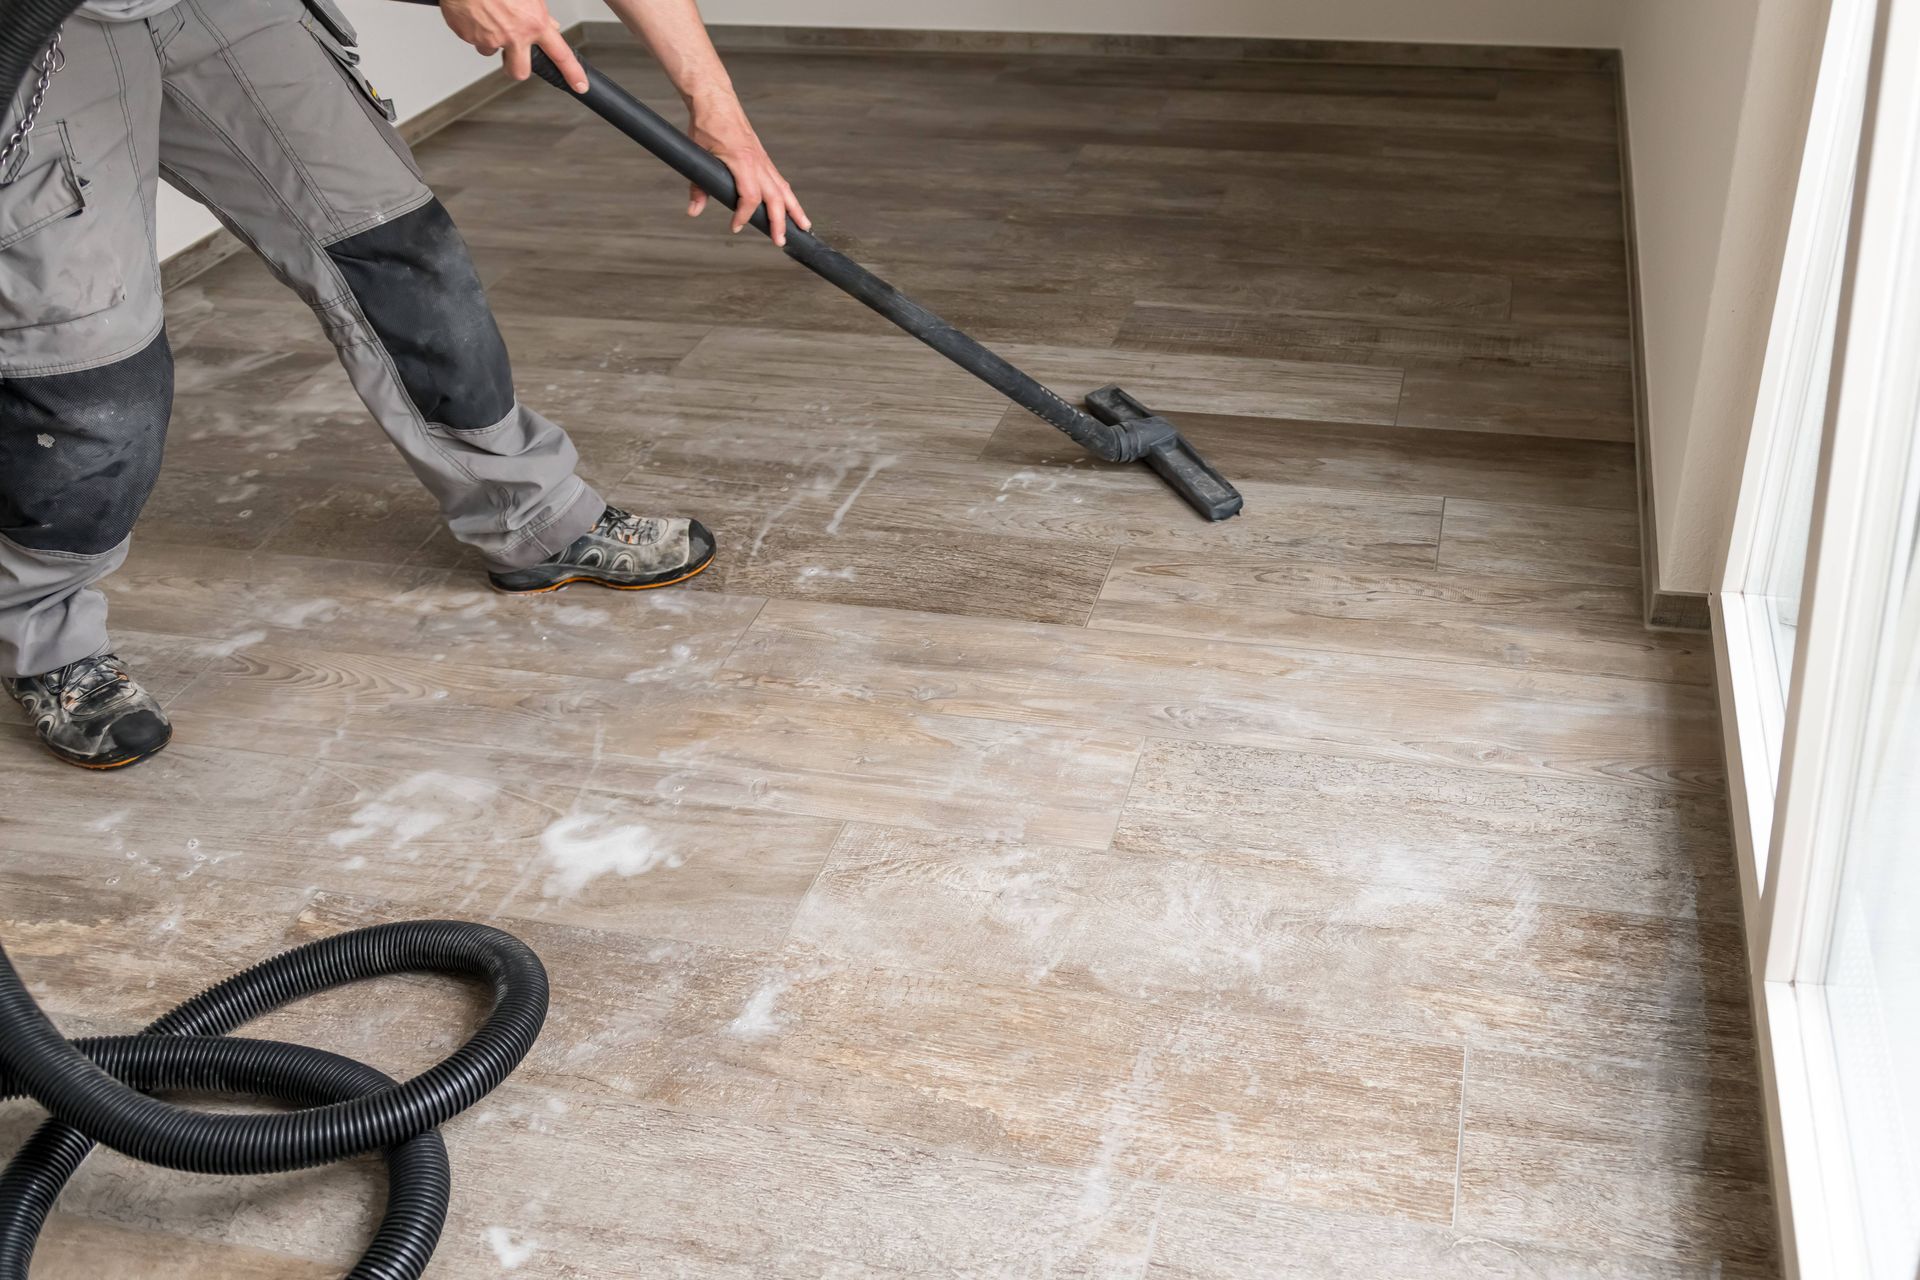 A man is using a vacuum cleaner to clean a wooden floor.